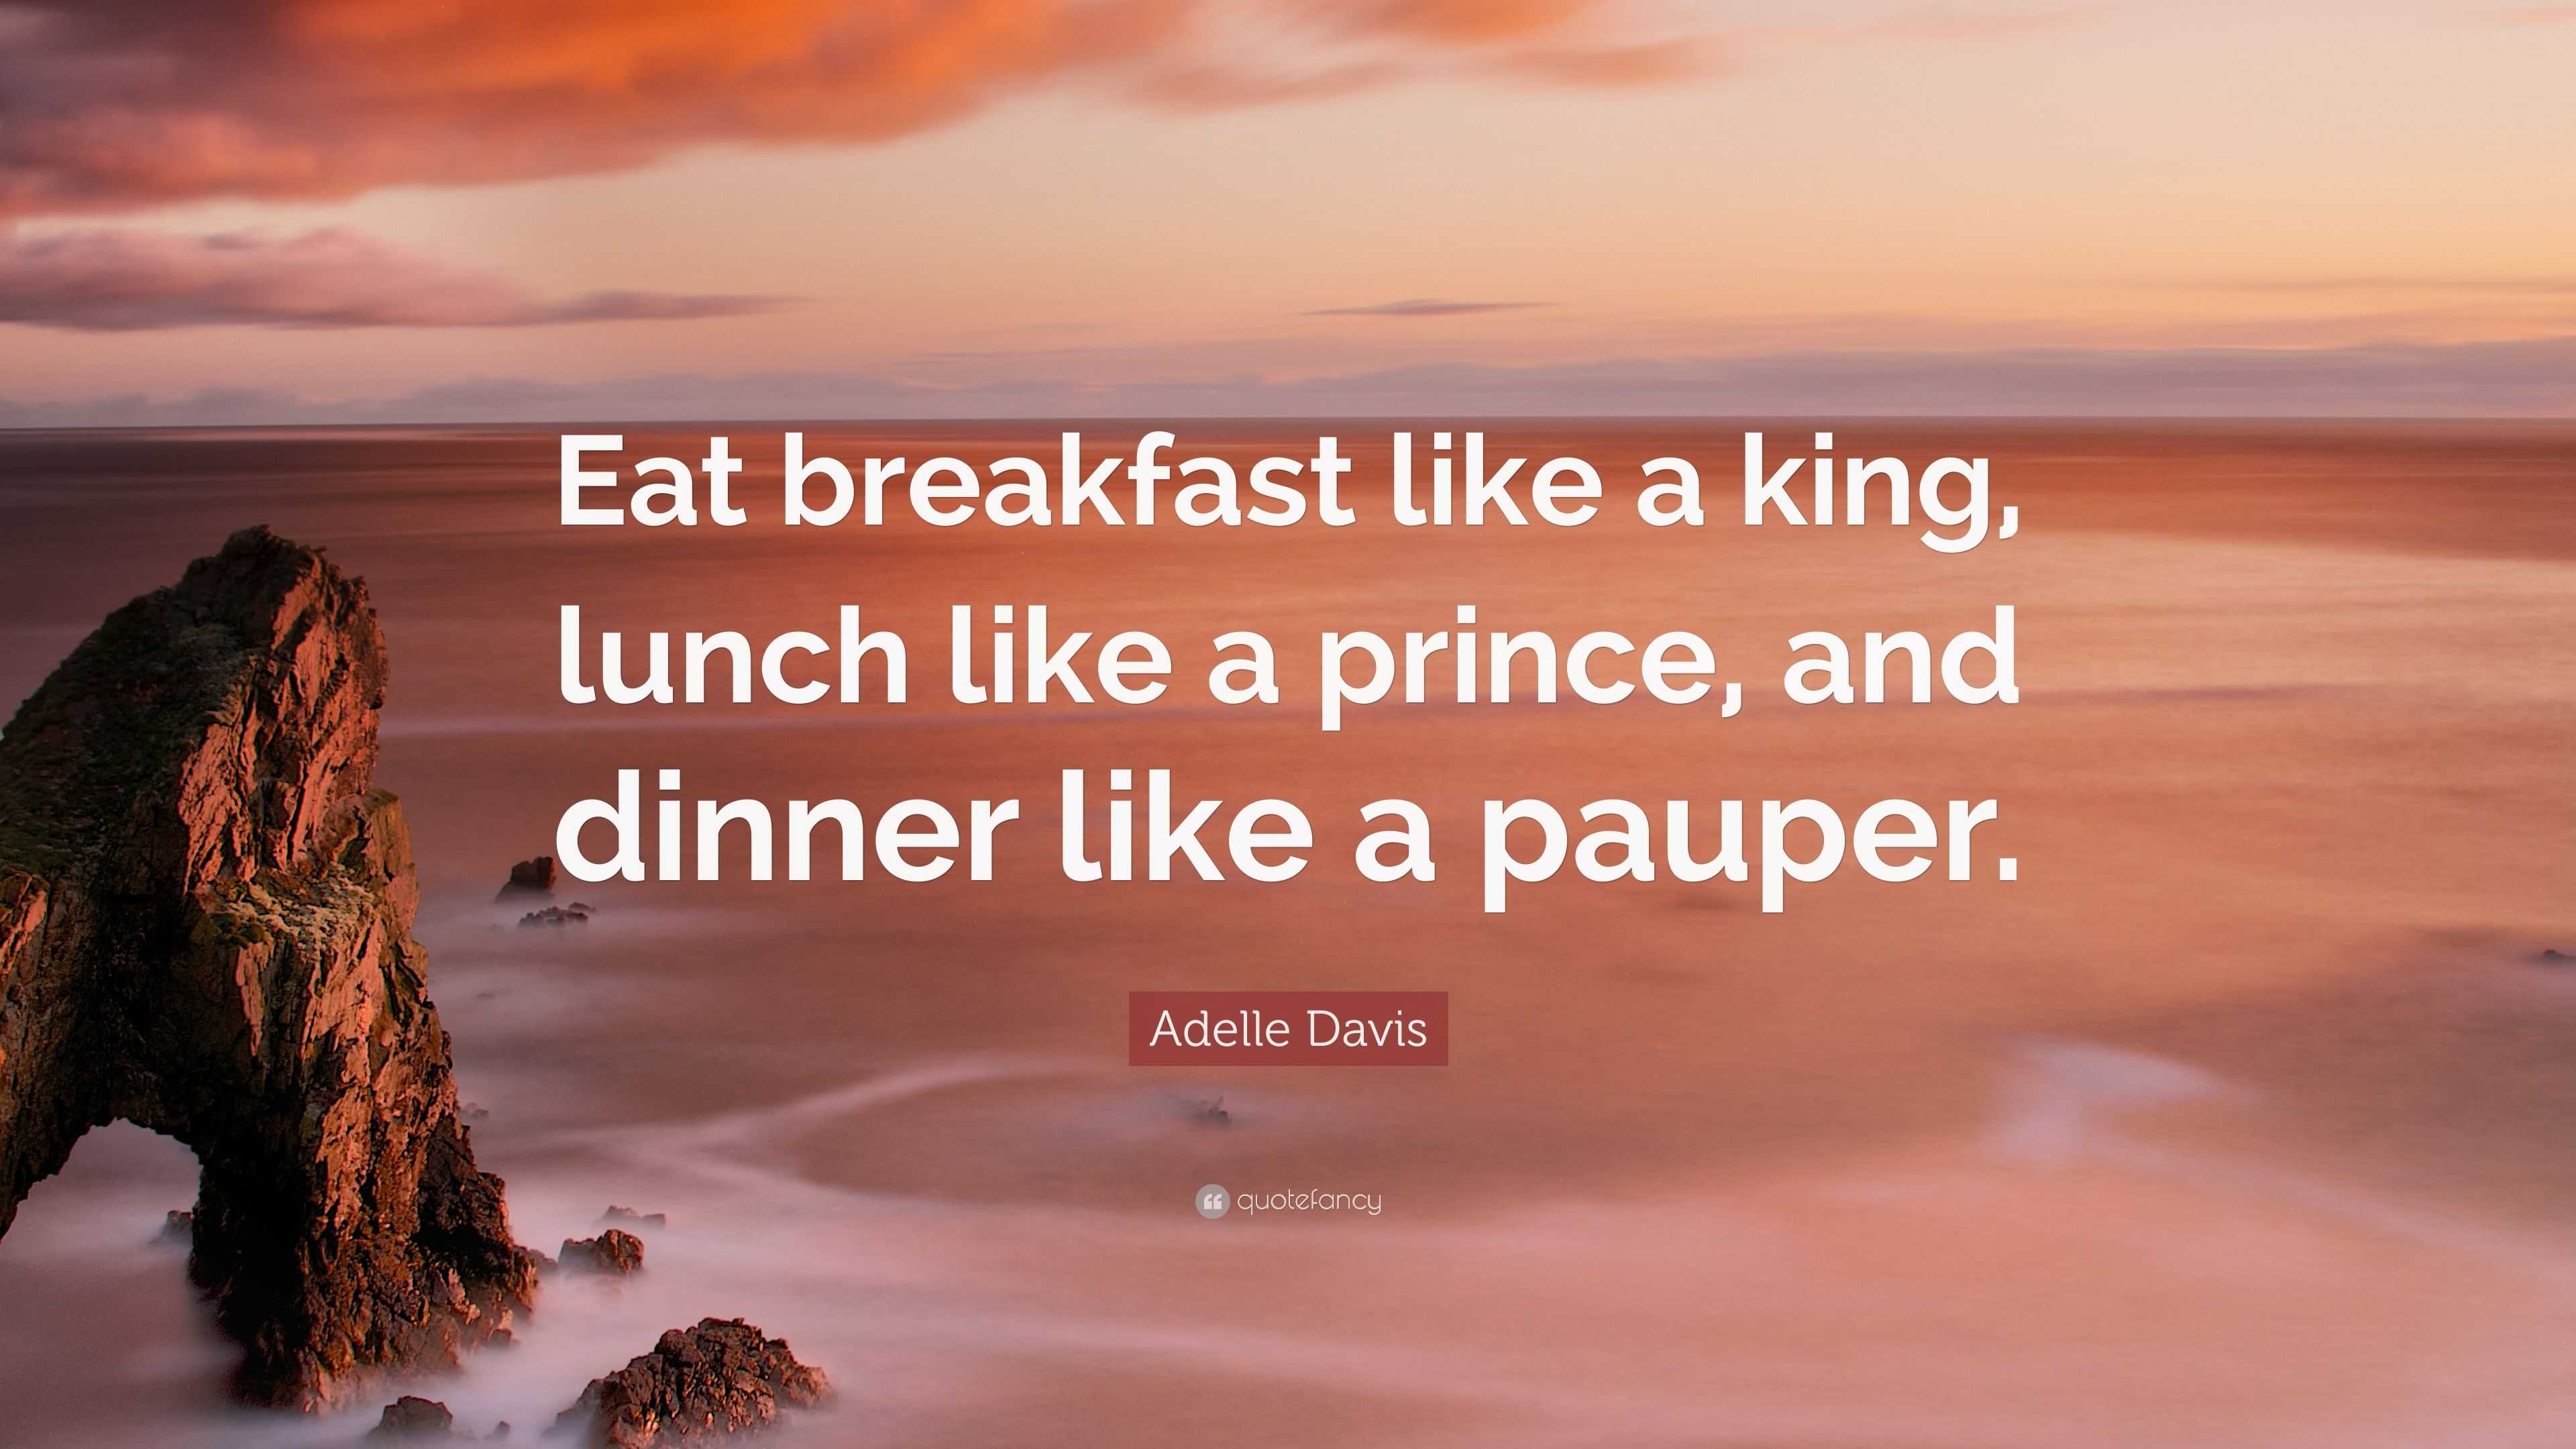 Adelle Davis Quote: "Eat breakfast like a king, lunch like a prince, and dinner like a pauper."